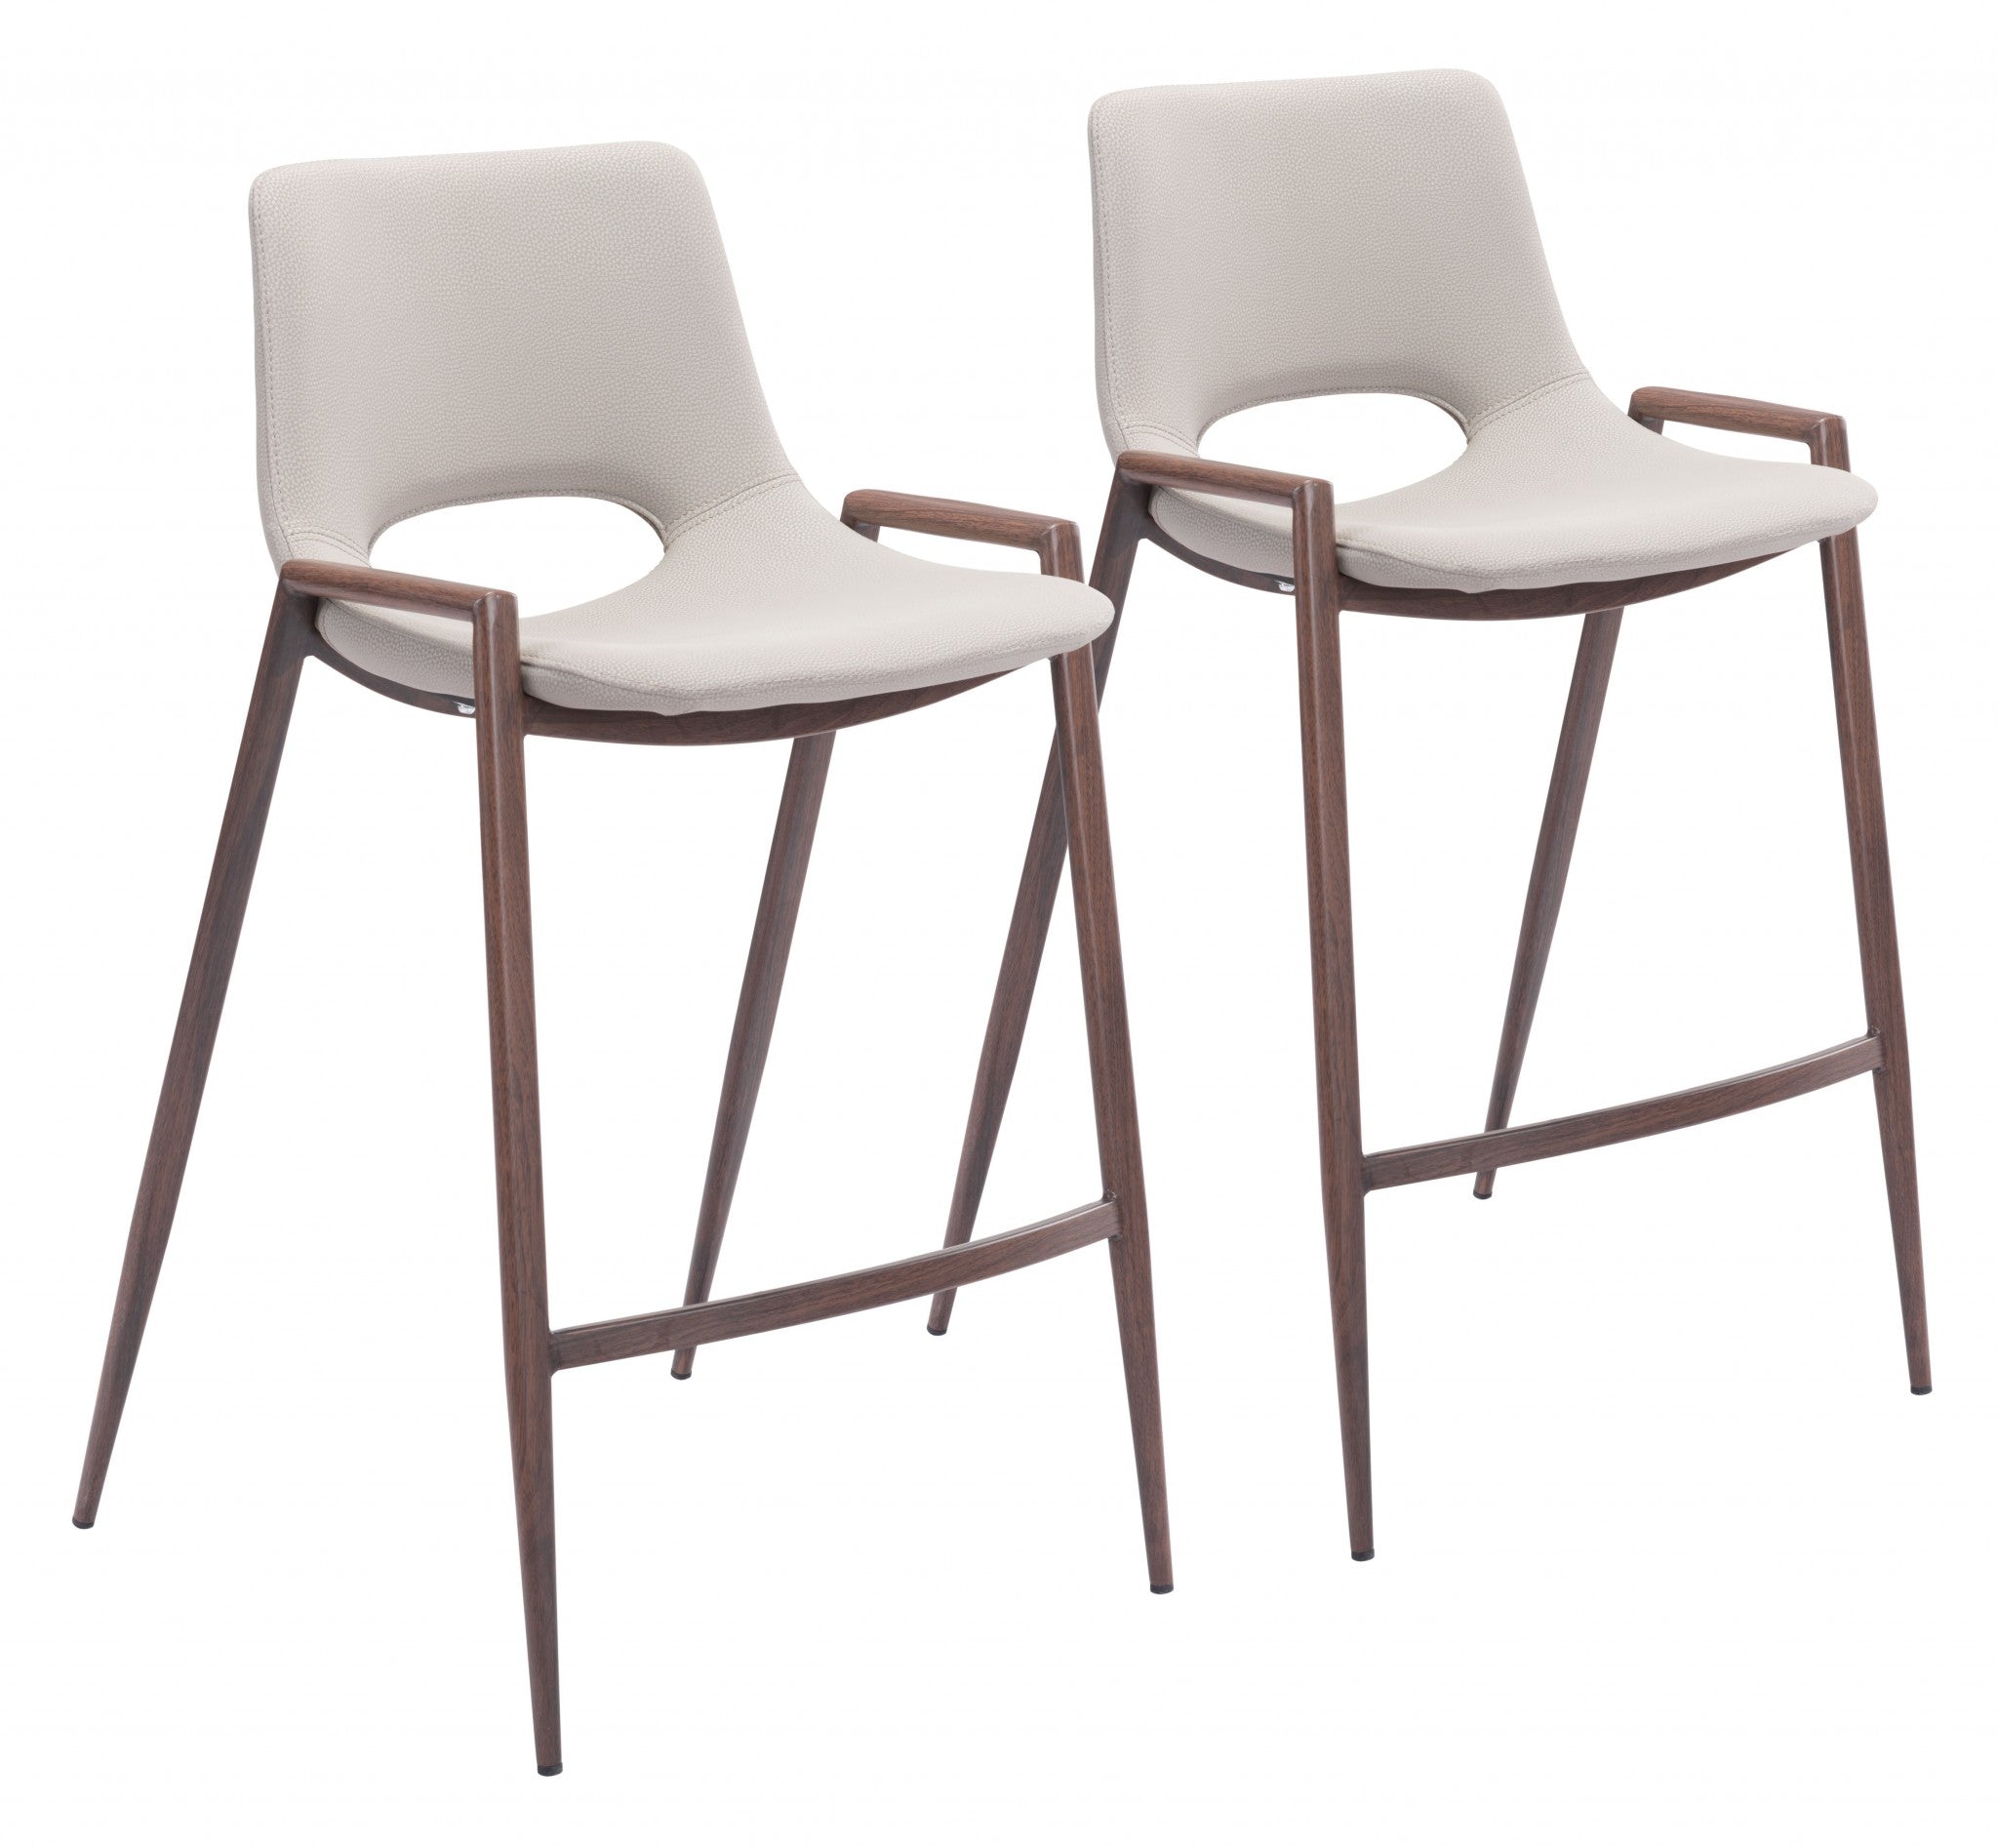 Set of Two 26" Beige And Brown Steel Low Back Counter Height Bar Chairs